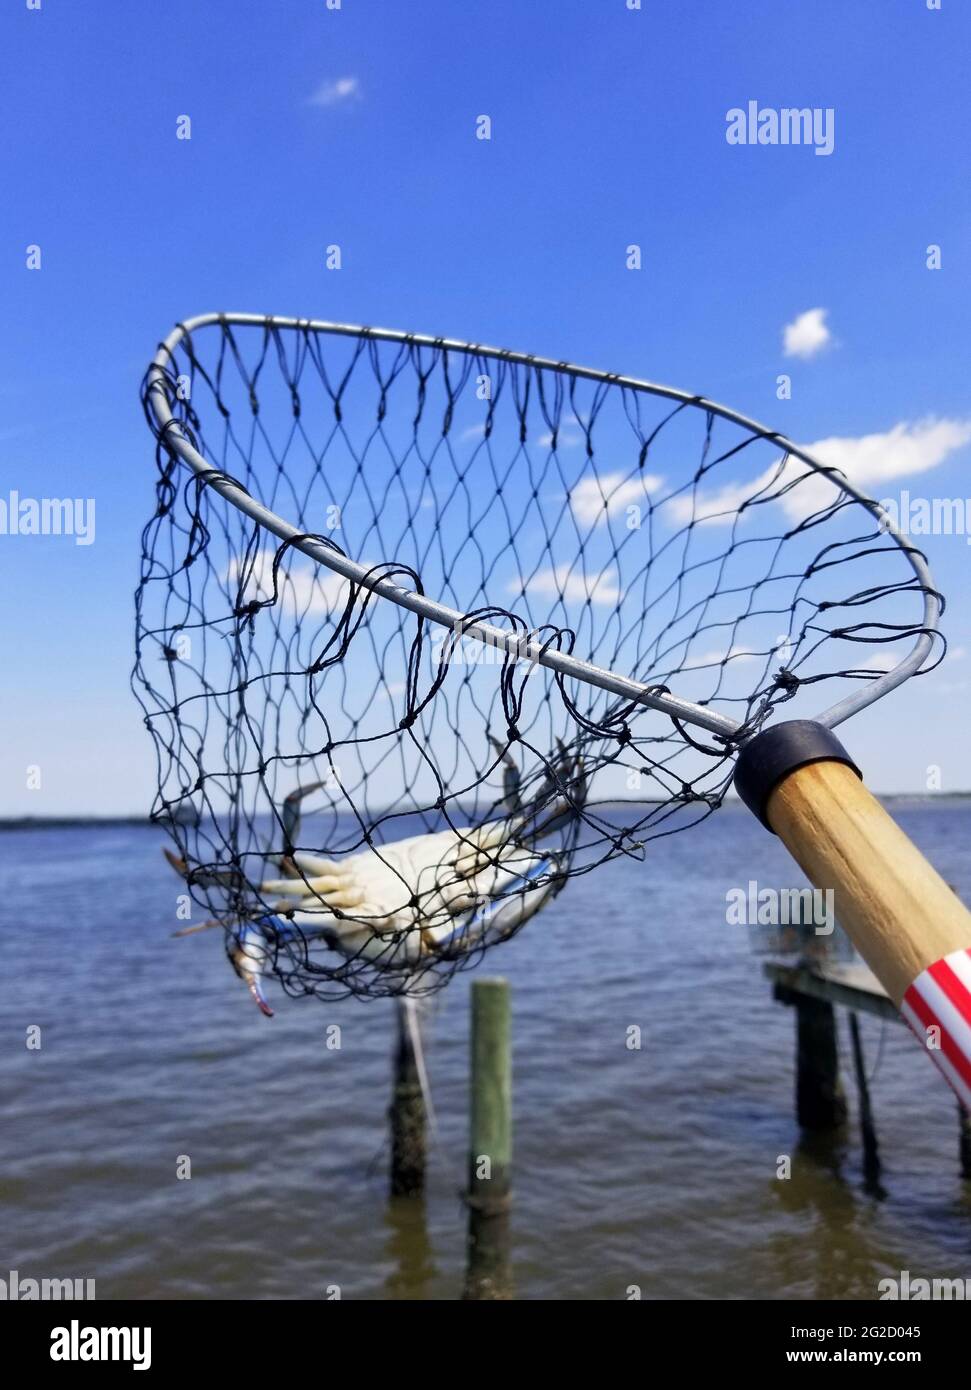 A wire net filled with one blue crab Stock Photo - Alamy